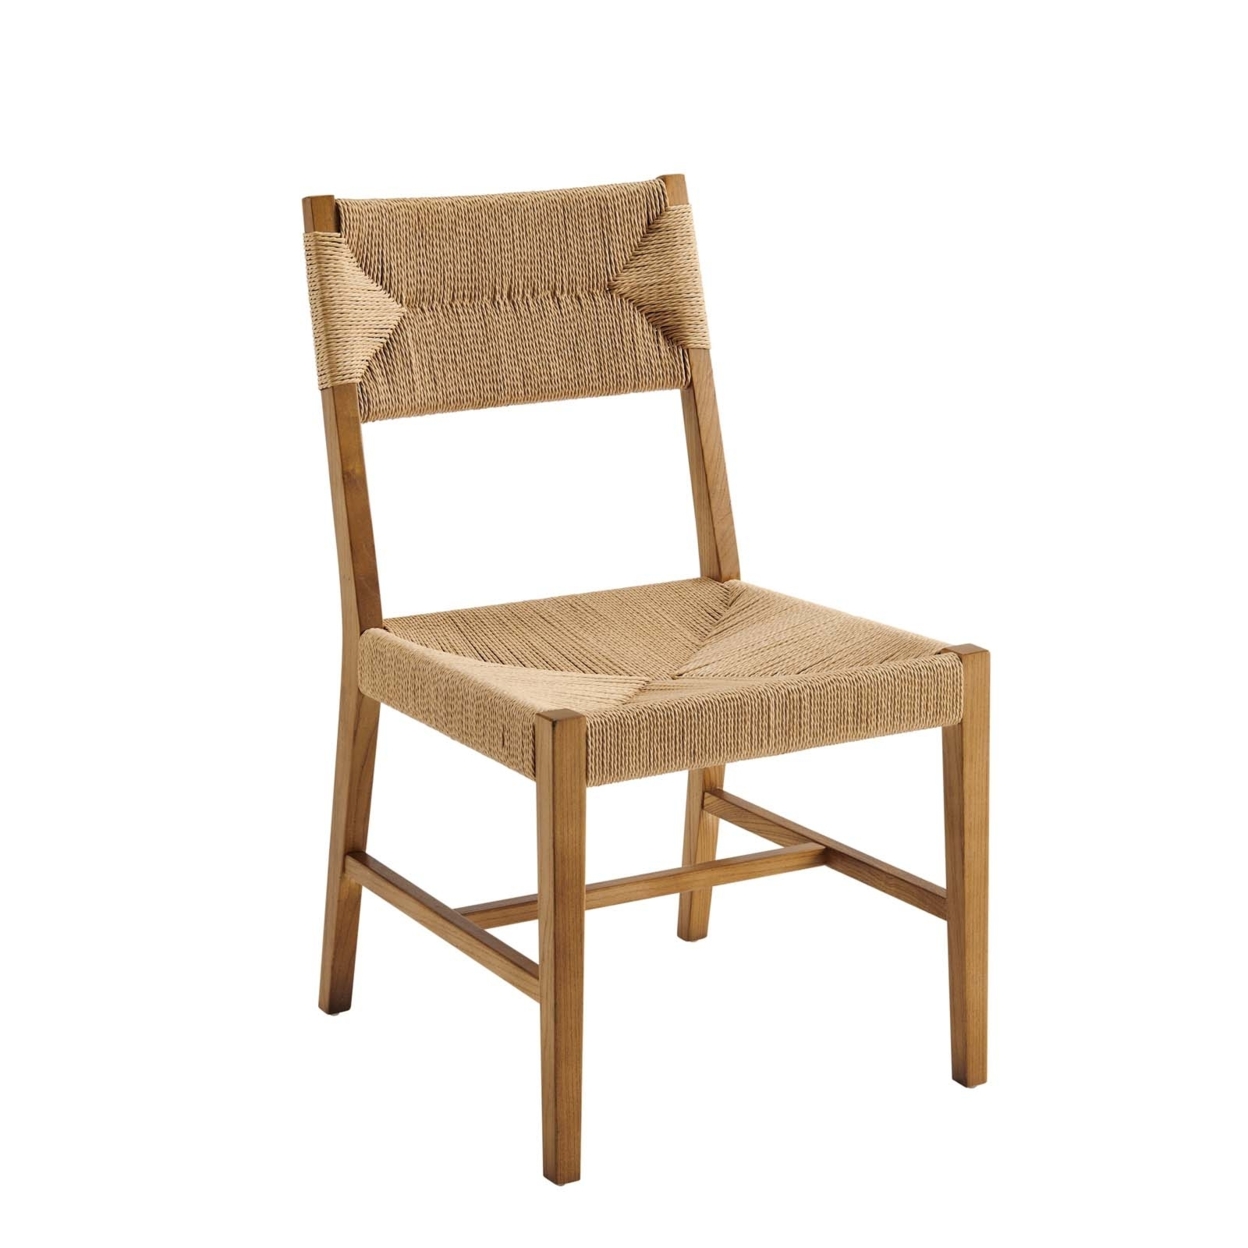 Bodie Wood Dining Chair, Natural Natural